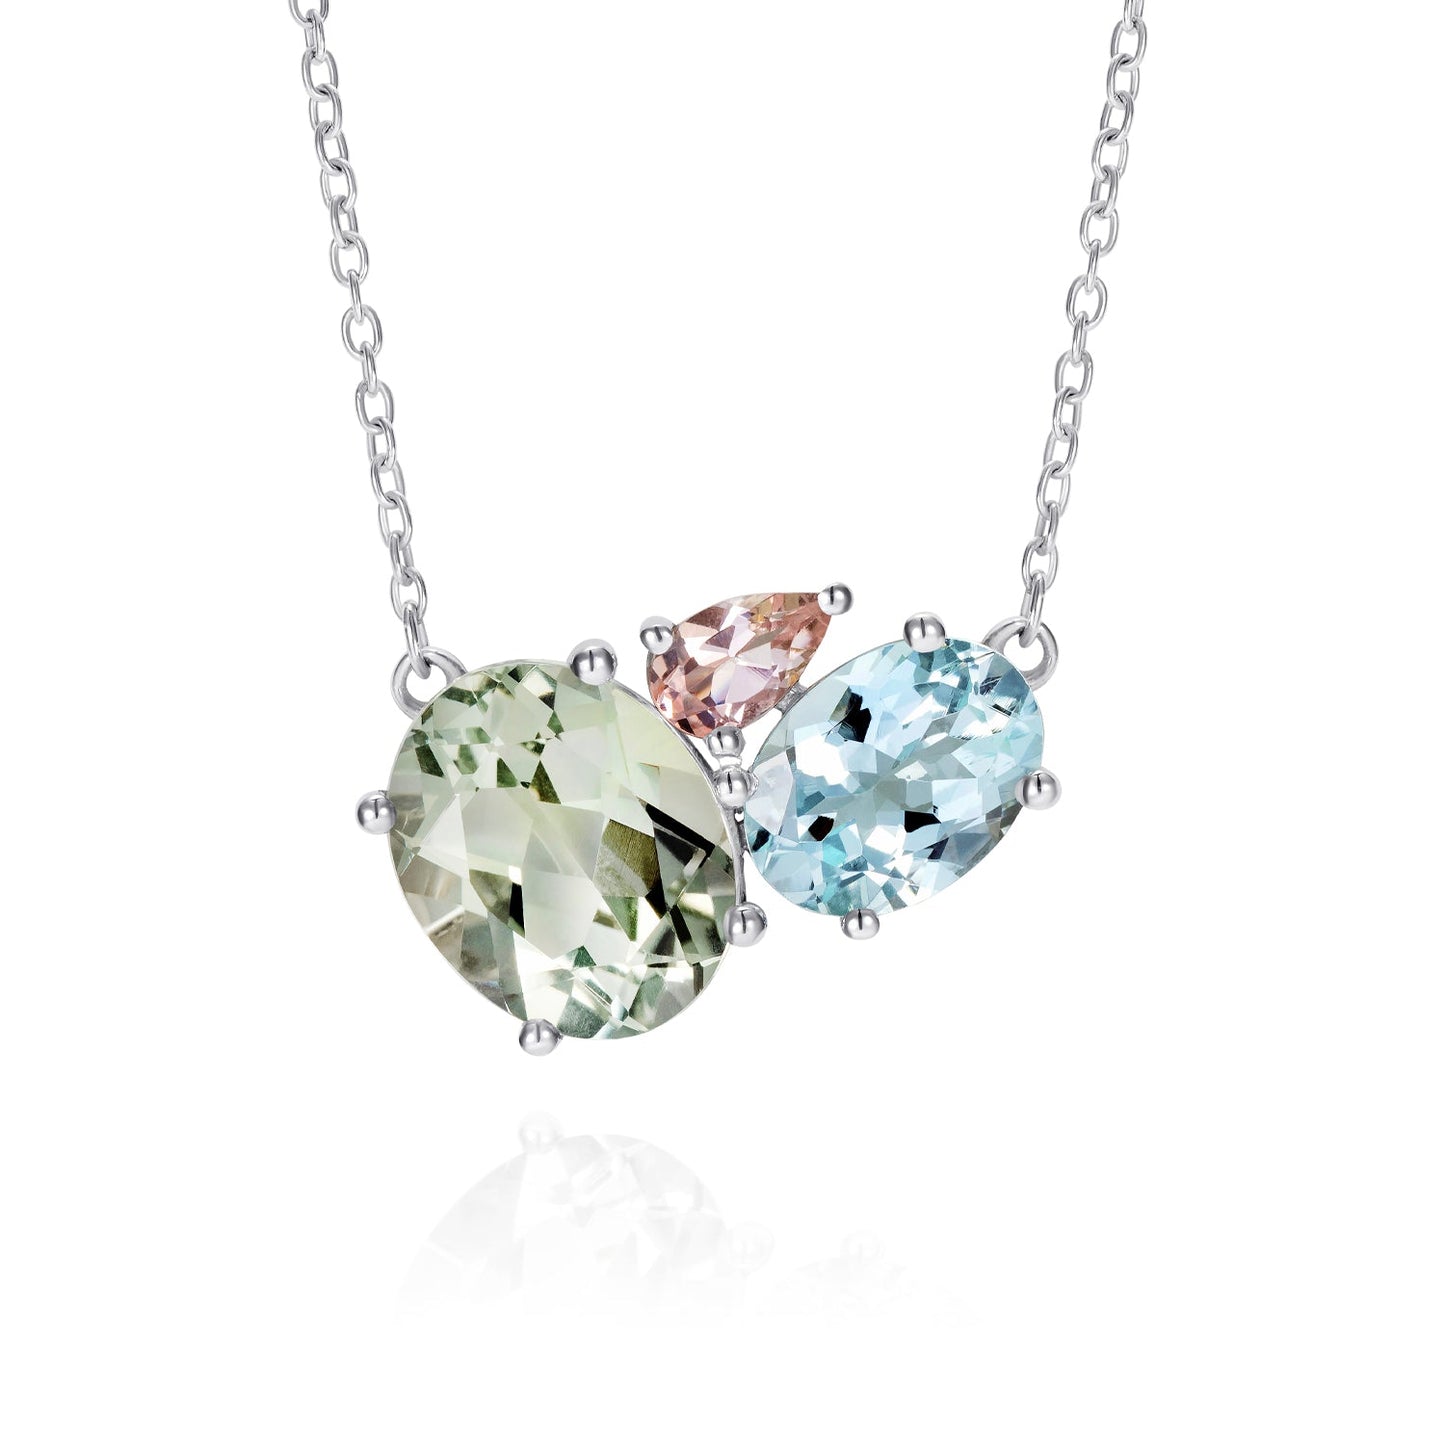 British Jewellers designed London-made custom silver jewellery - Green Amethyst Silver Cluster Necklace with Aquamarine and Morganite – Como Collection, Augustine Jewellery, British Jewellers, Gemstone Jewellery, Luxury Jewellery London.